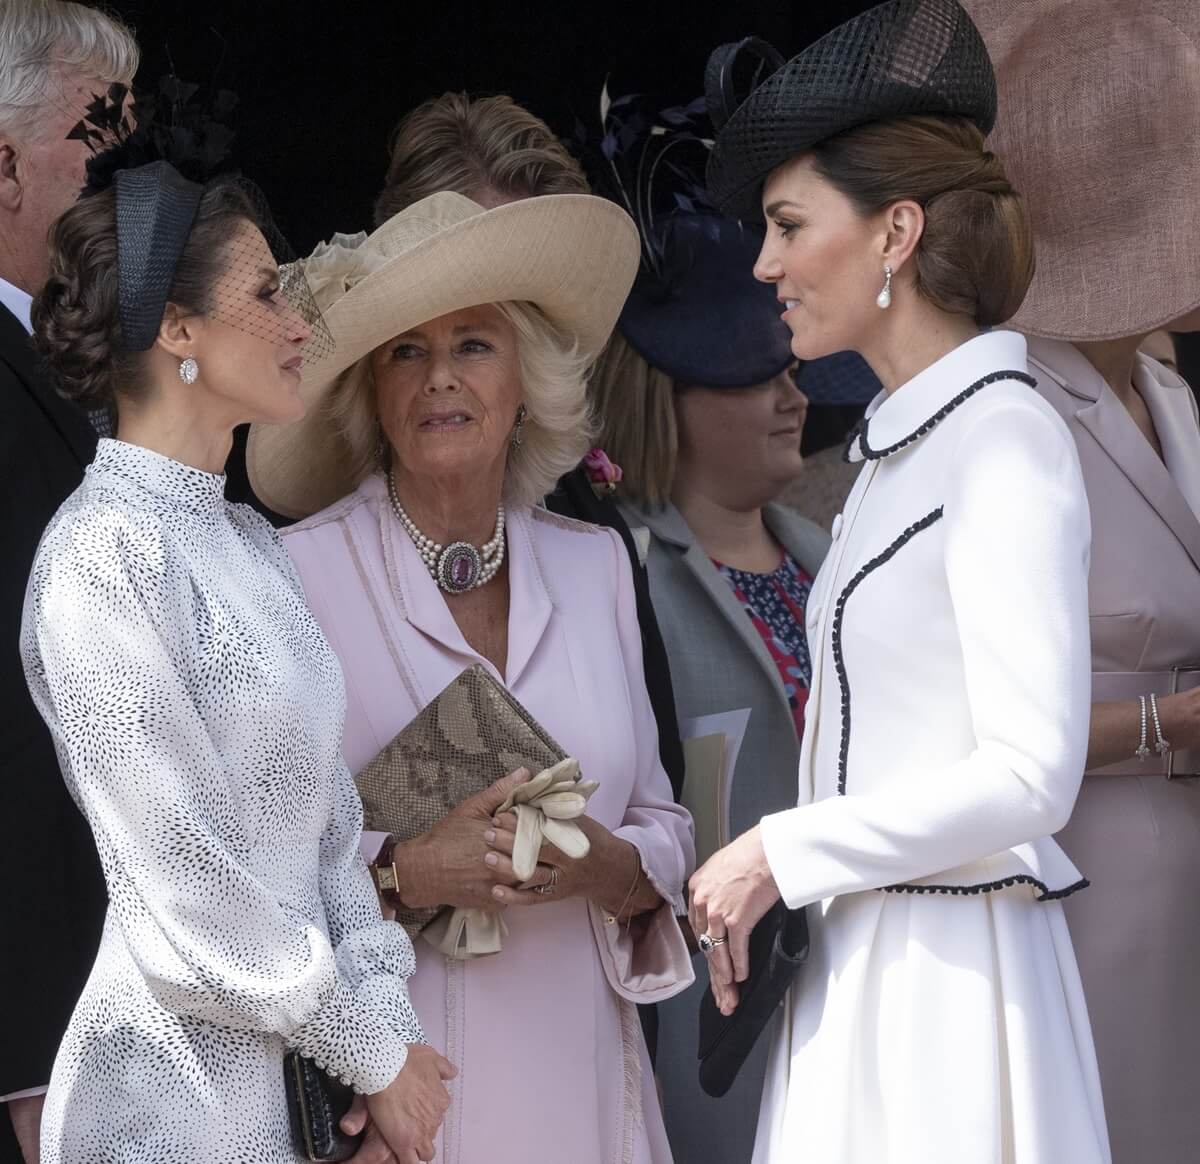 Queen Letizia of Spain chats with Queen Camilla and Kate Middleton during the Order of the Garter Service at St. George's Chapel 